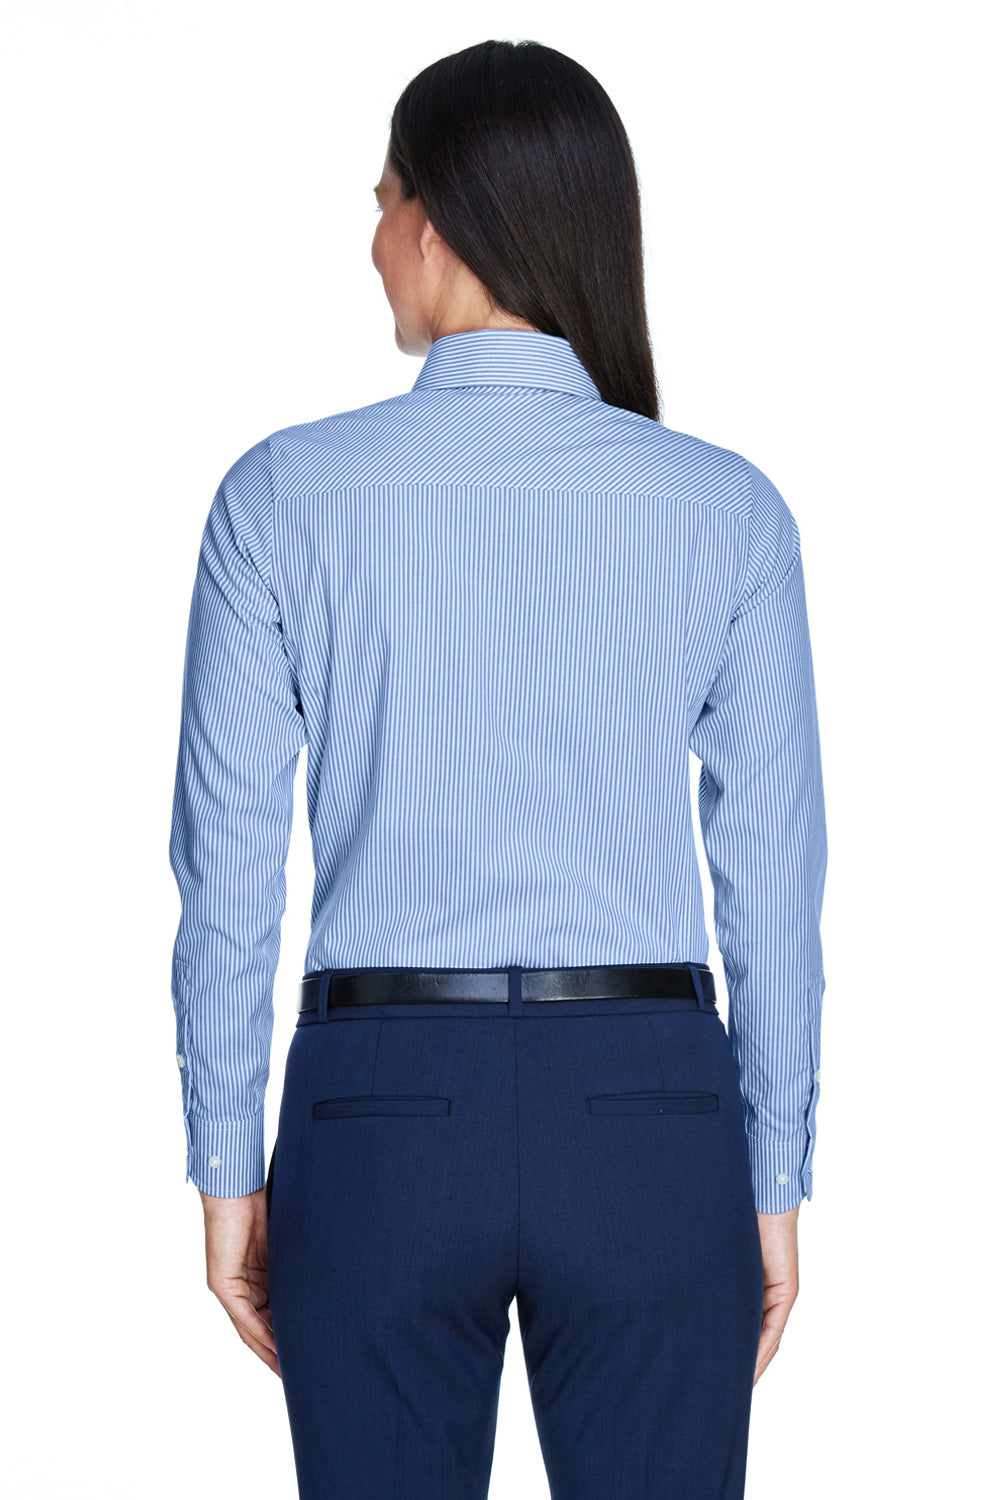 Devon & Jones D645W Womens Crown Woven Collection Wrinkle Resistant Long Sleeve Button Down Shirt French Blue Back